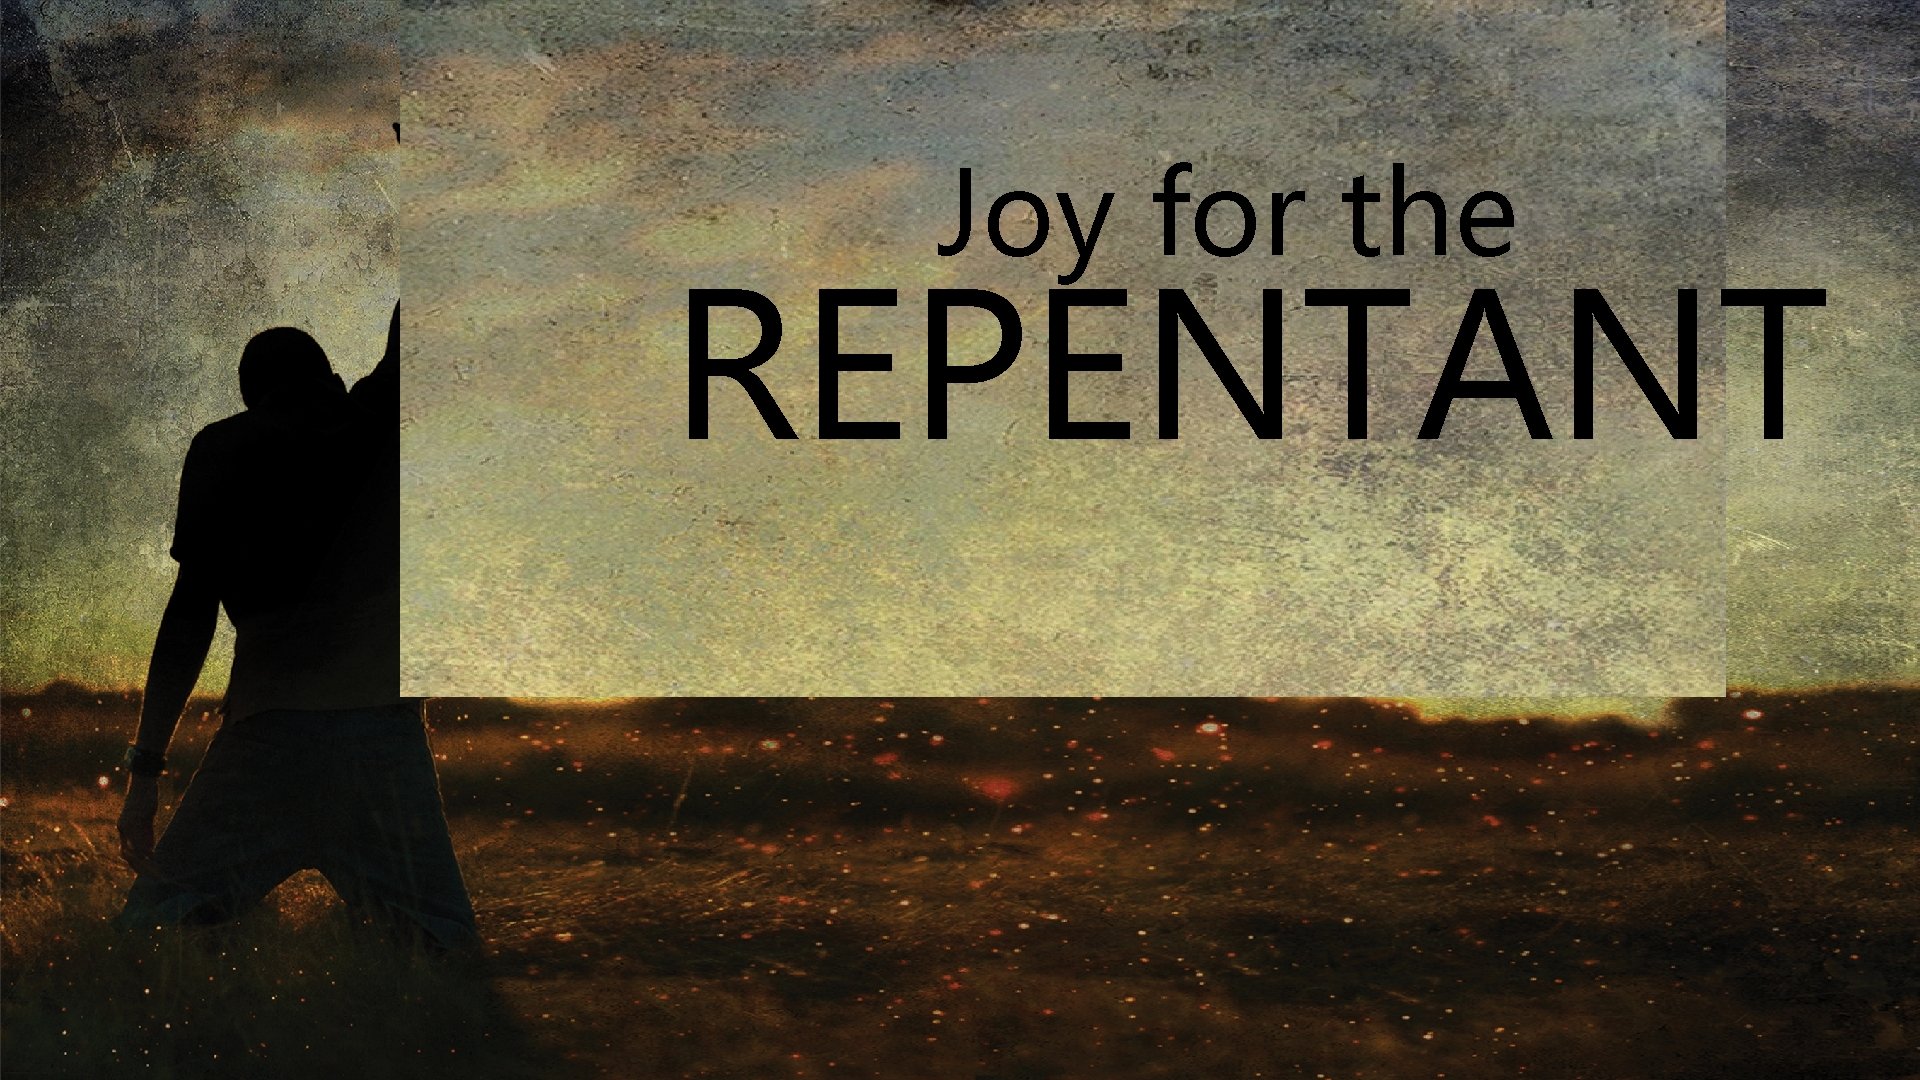 Joy for the REPENTANT 